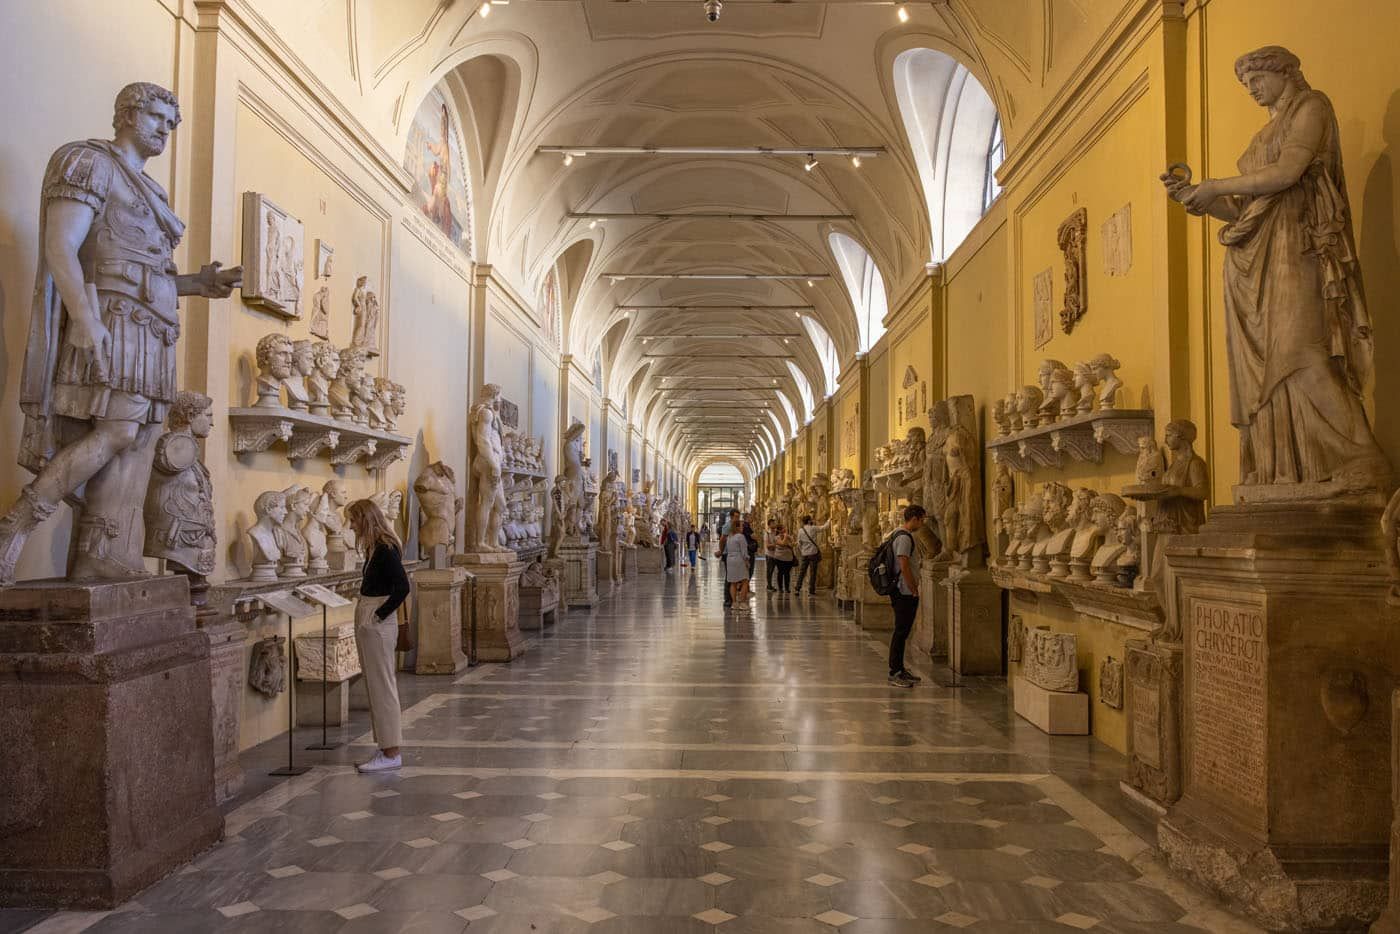 Hall of Statues | How to visit the Vatican Museums and St. Peter's Basilica